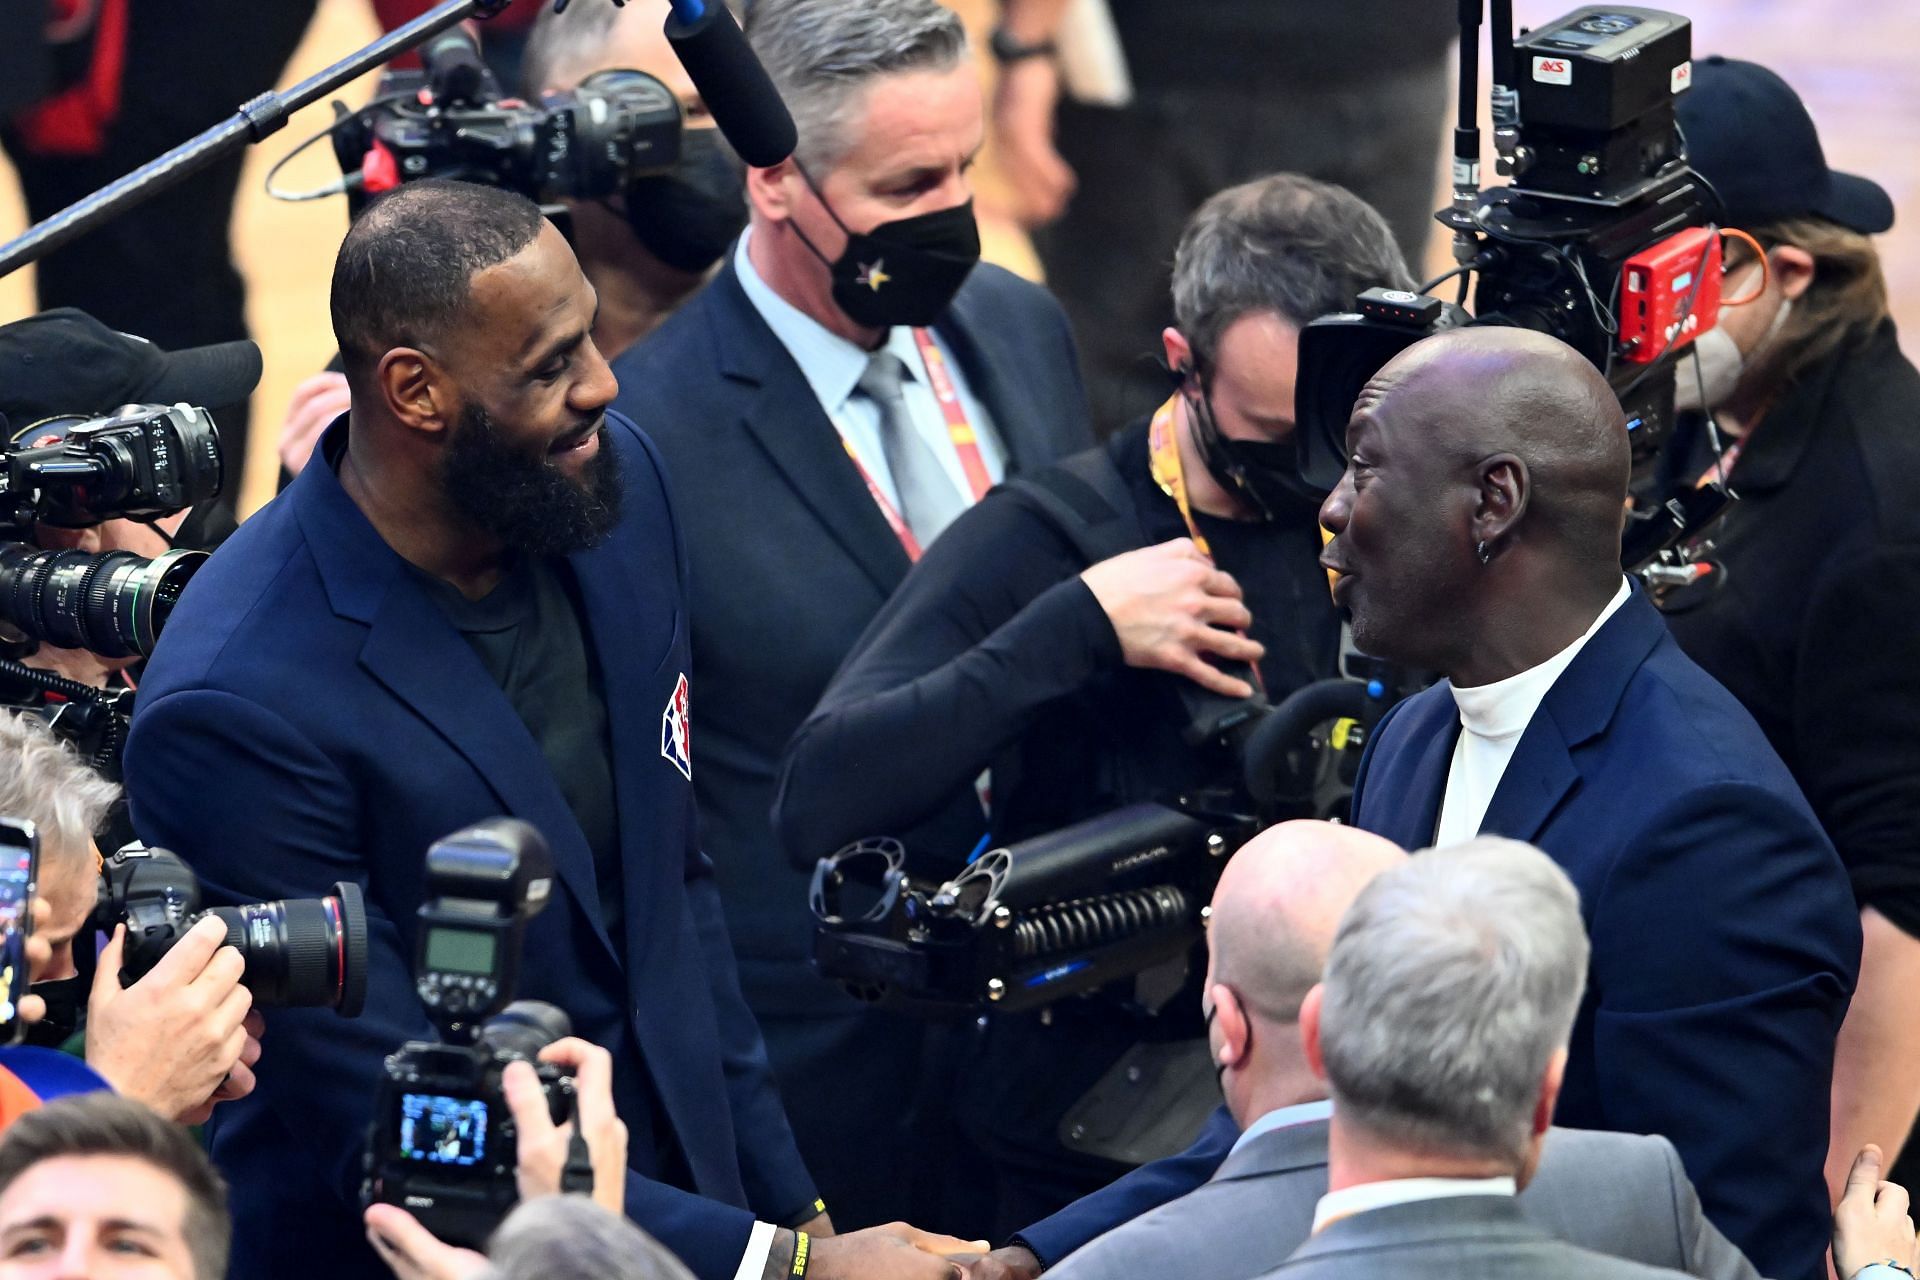 MJ and LBJ embrace each other during the All-Star Weekend